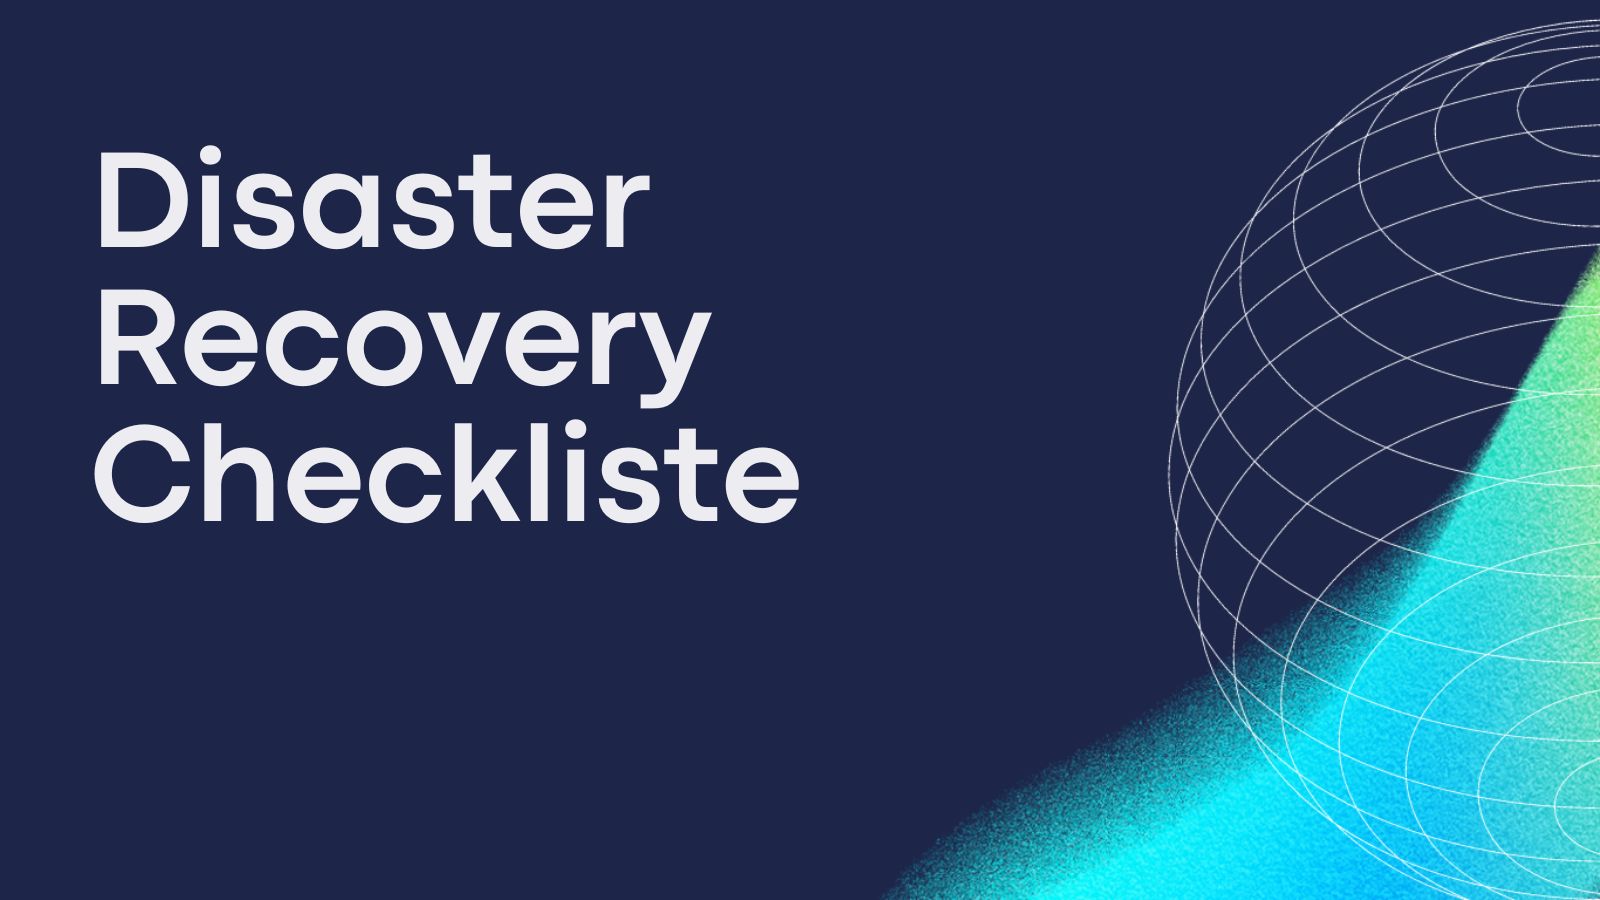 Disaster Recovery Checkliste